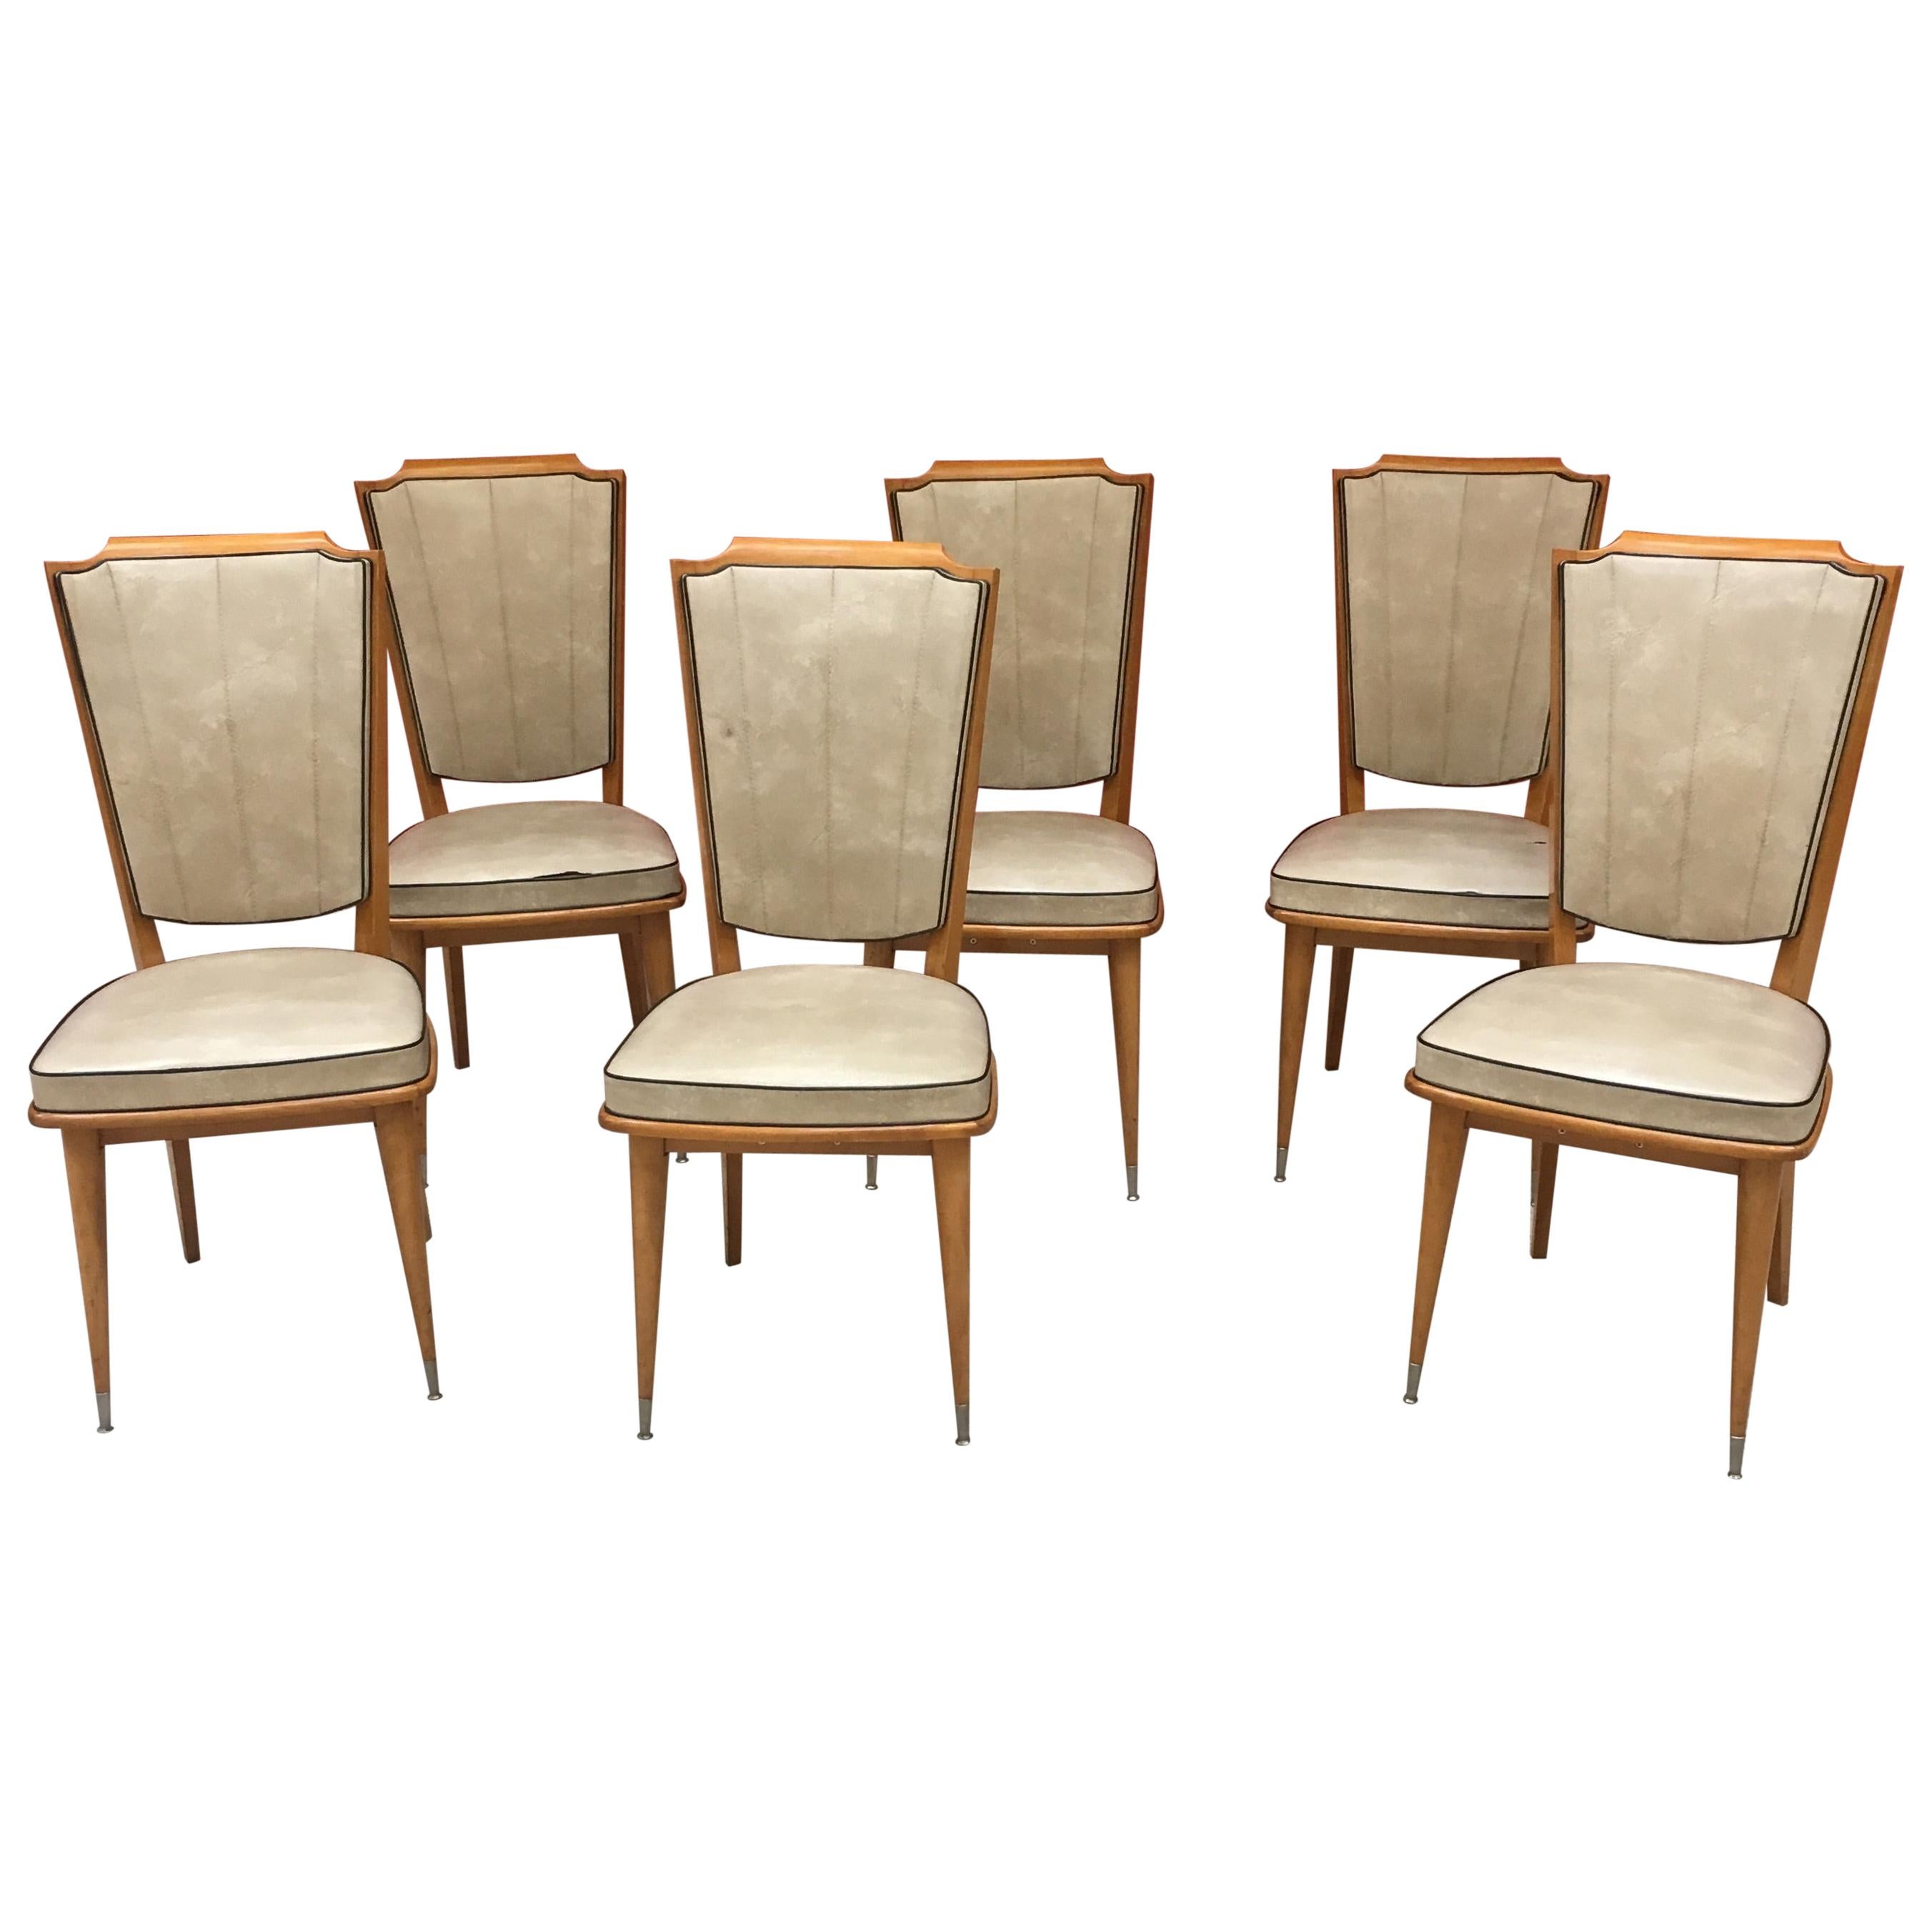 6 Typical French Chairs 1960 For Sale